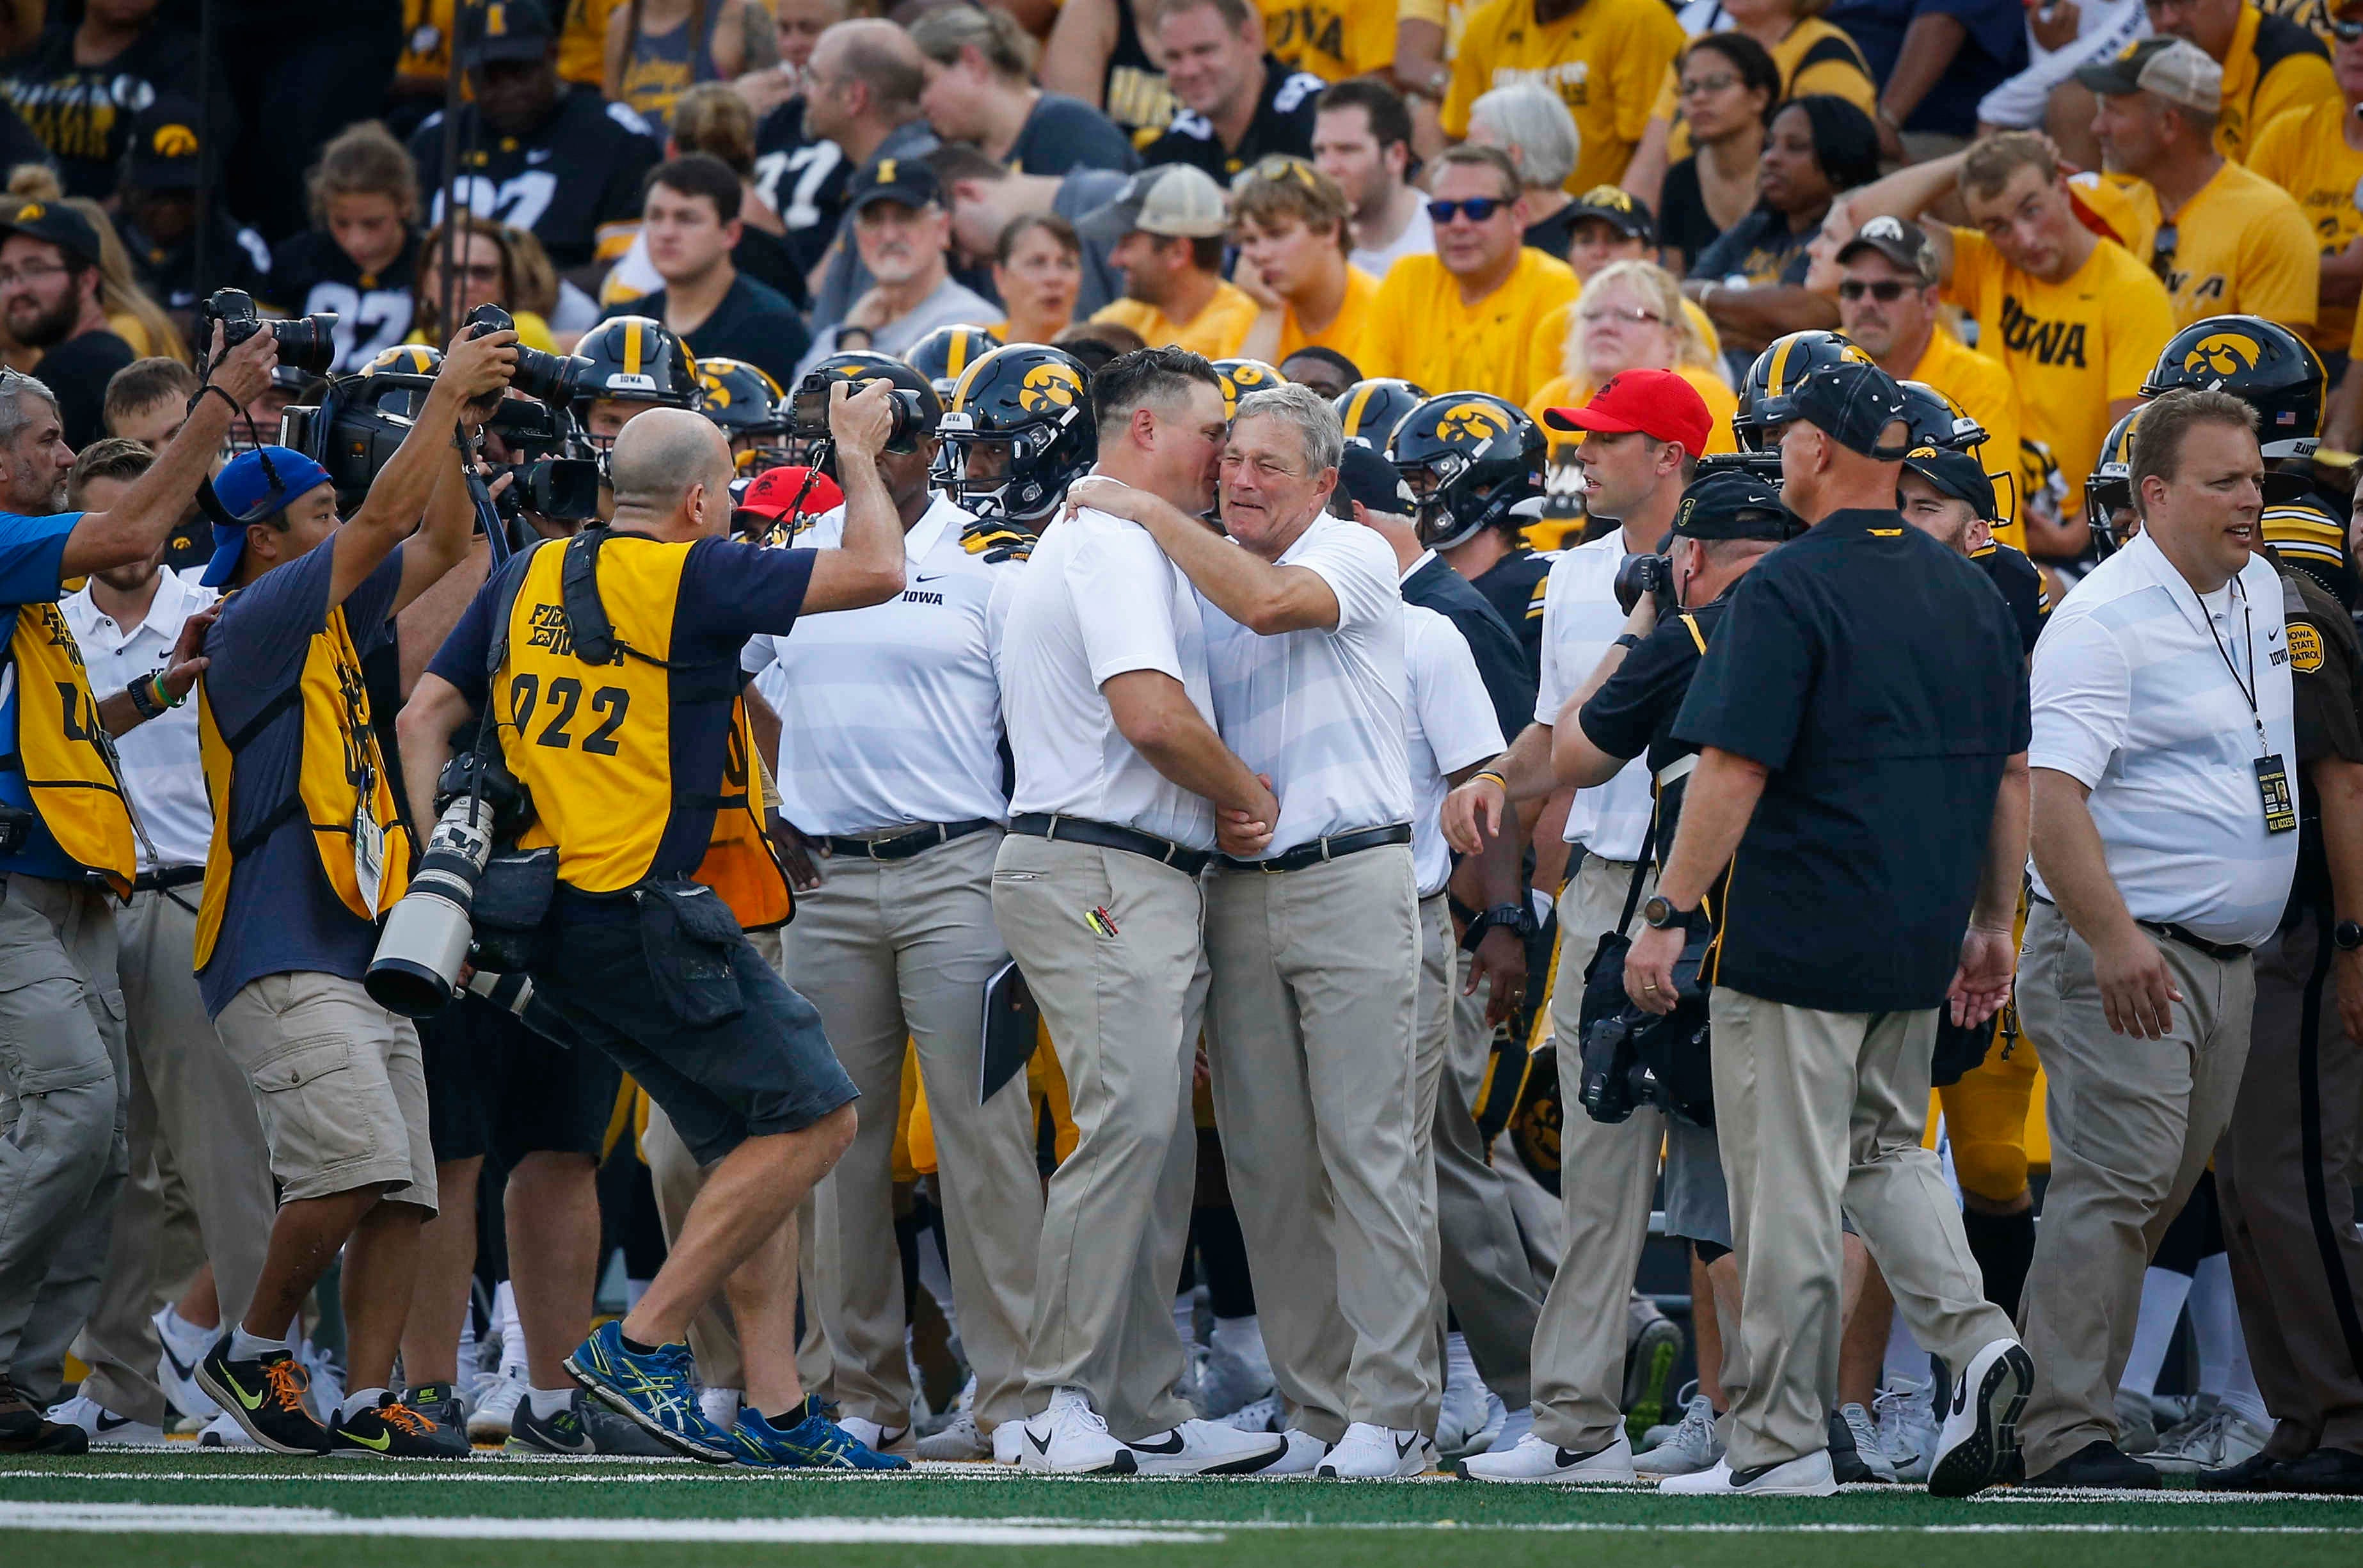 An emotional Iowa head football coach Kirk Ferentz gets a hug from his son and offensive coordinator Brian Ferentz after a 33-7 win over Northern Illinois on Saturday, Sept. 1, 2018, at Kinnick Stadium in Iowa City. The win makes Ferentz the winningest coach in Iowa football history.